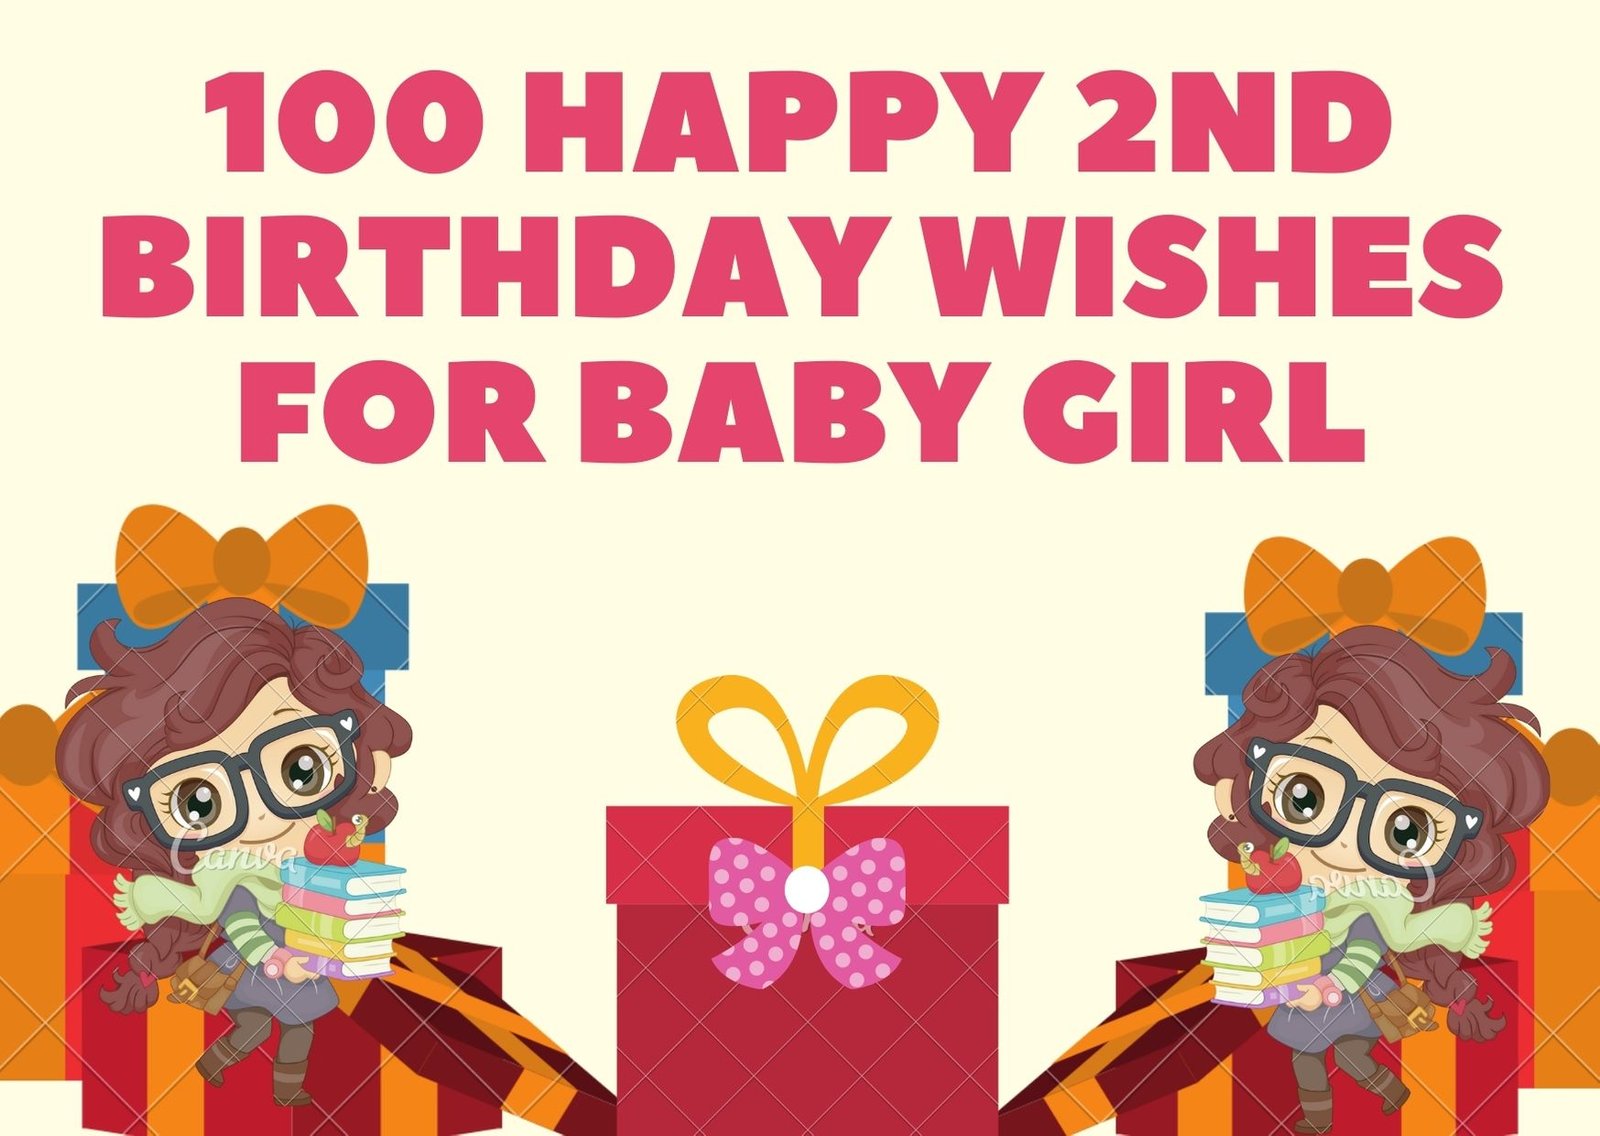 100 Happy 2nd Birthday Wishes For Baby Girl